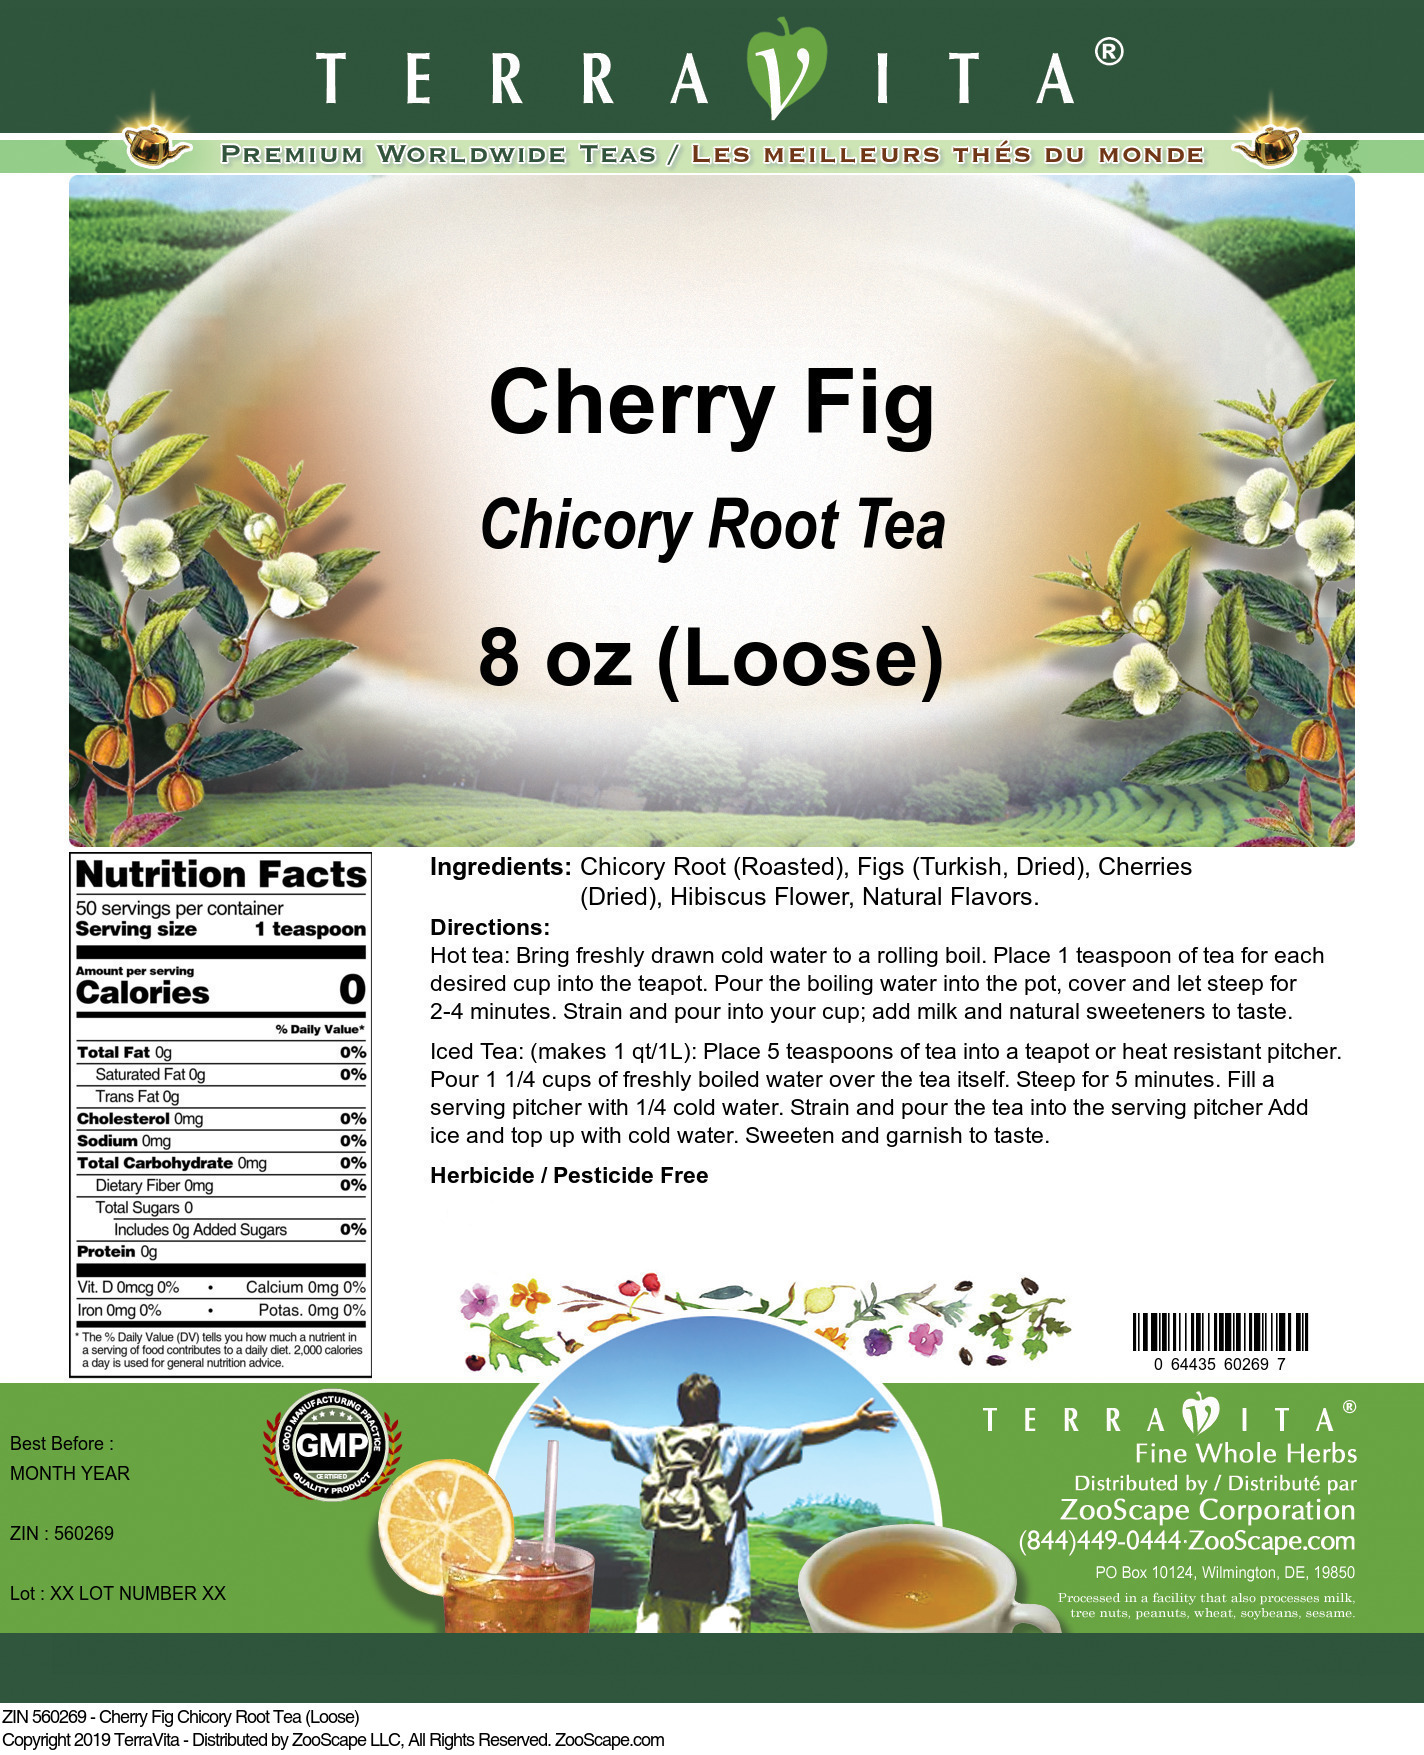 Cherry Fig Chicory Root Tea (Loose) - Label